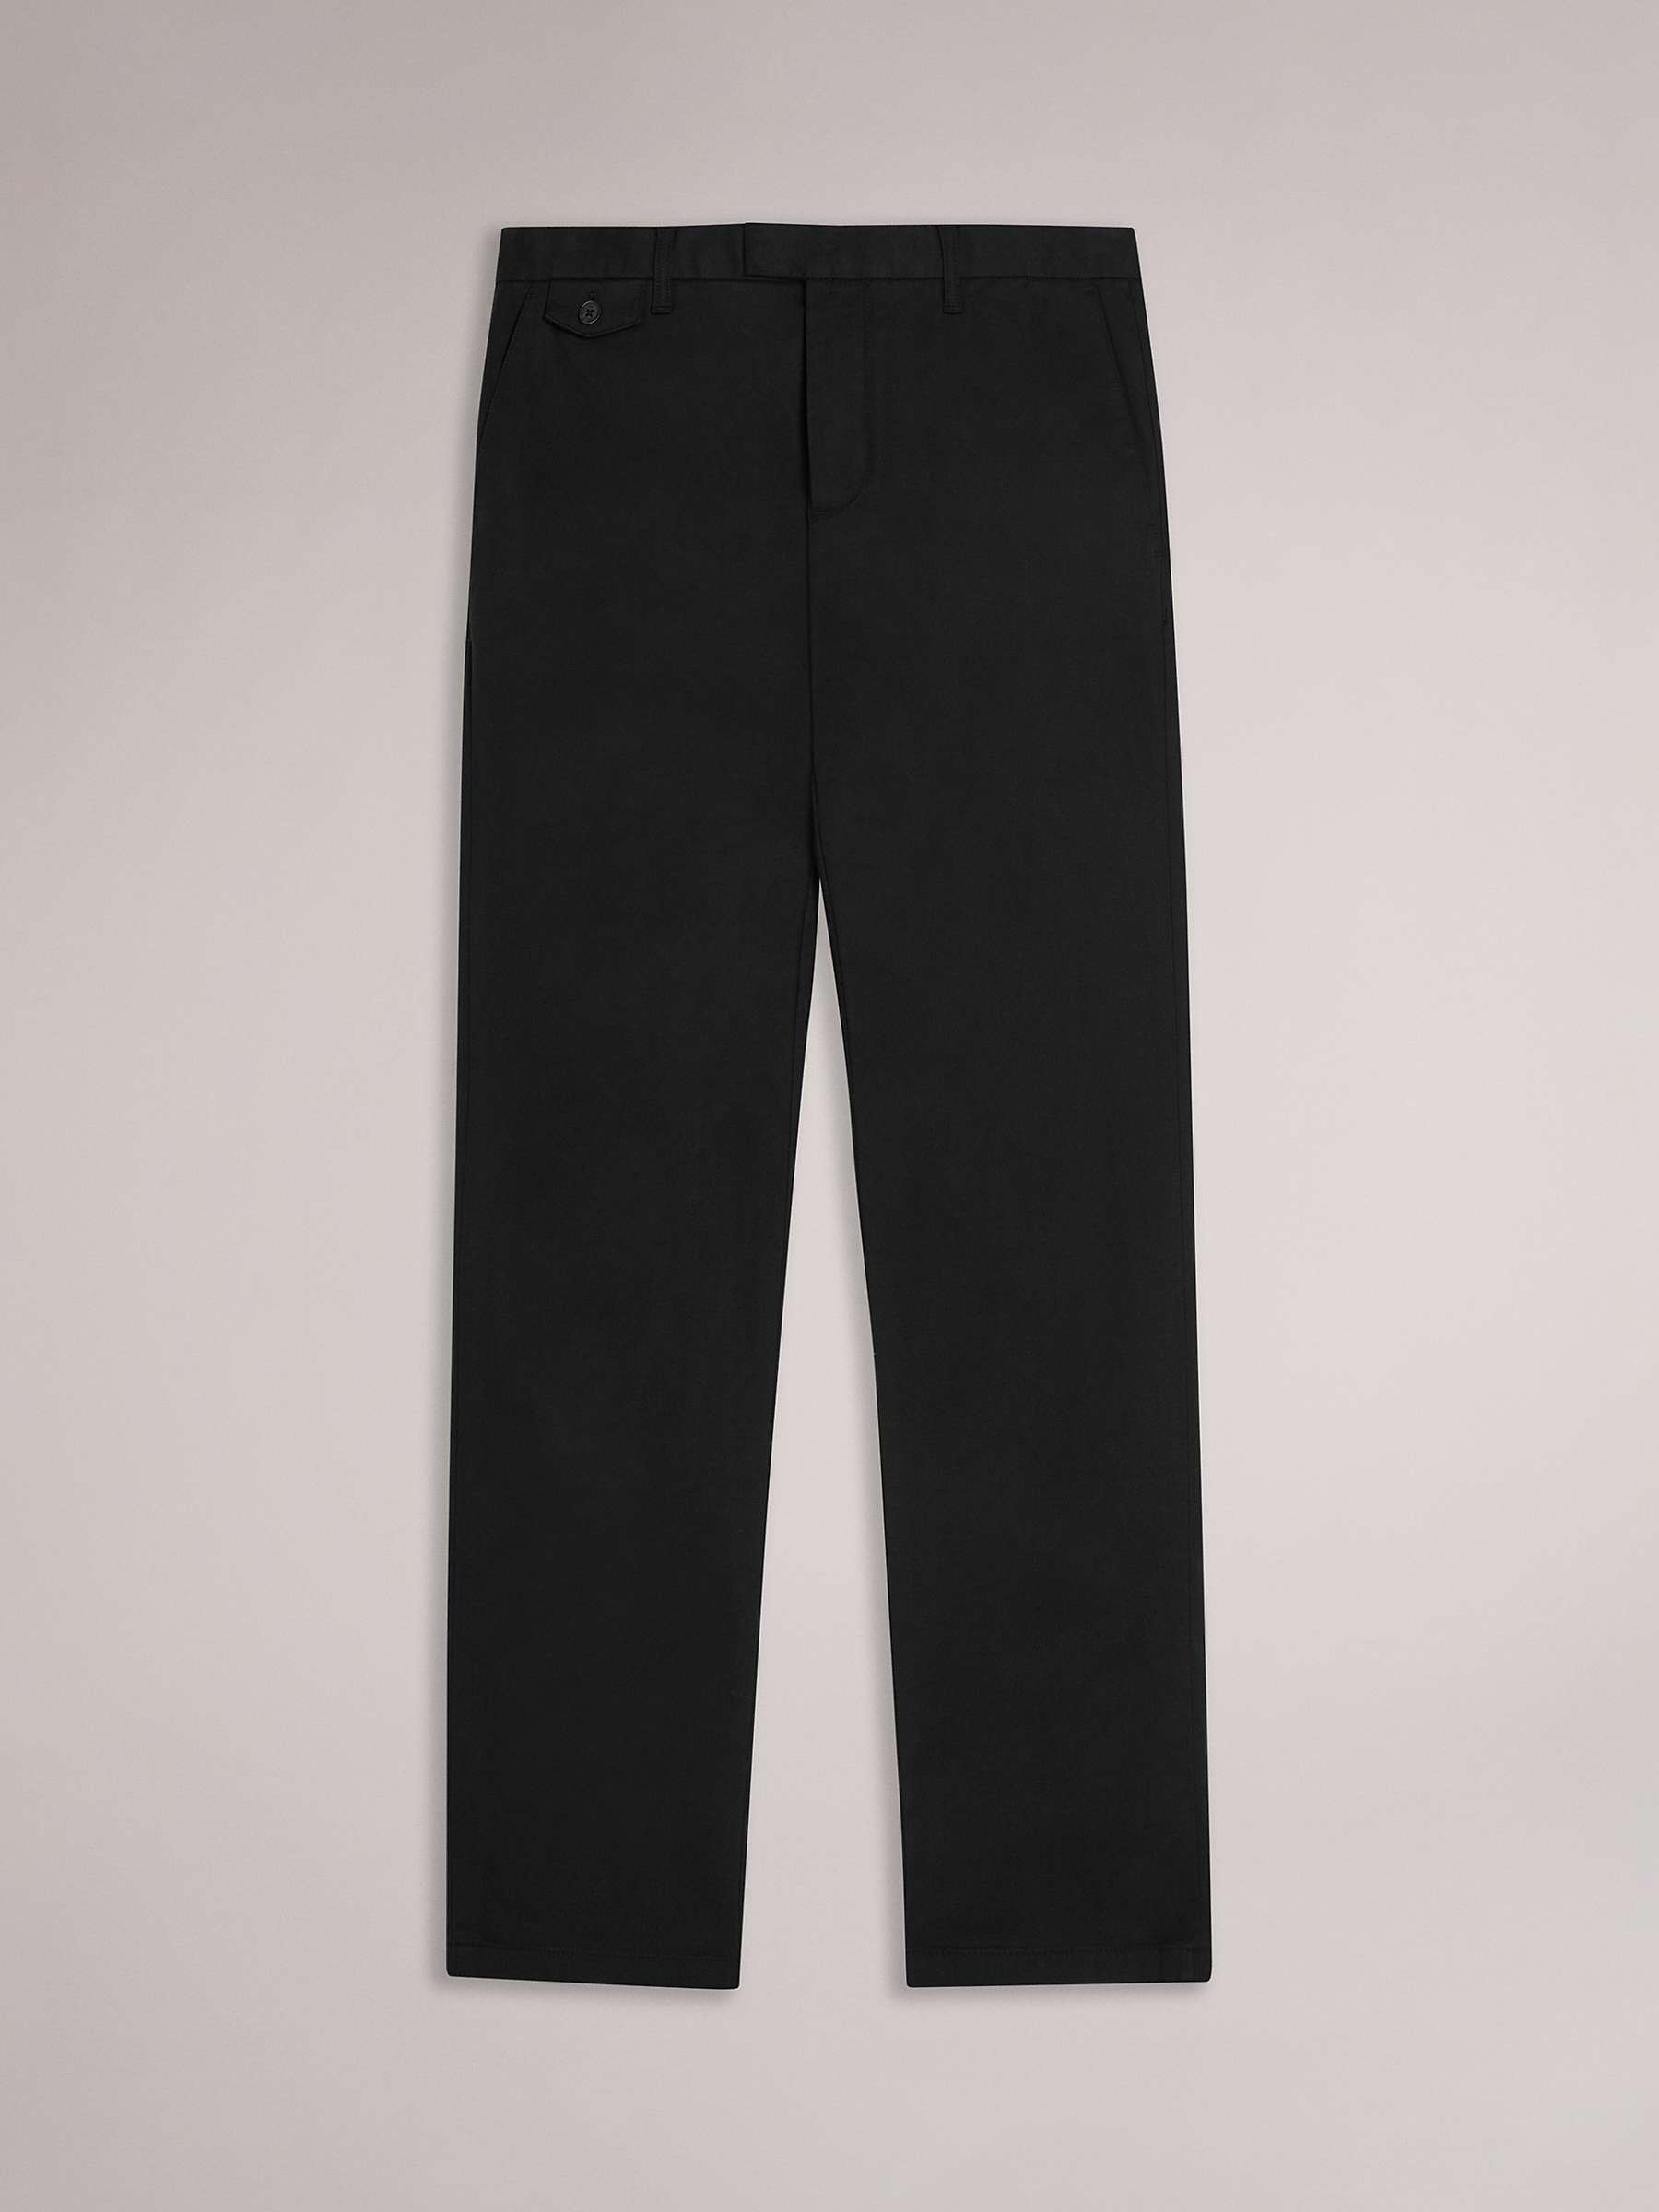 Buy Ted Baker Haydae Slim Fit Textured Chino Trousers, Black Online at johnlewis.com